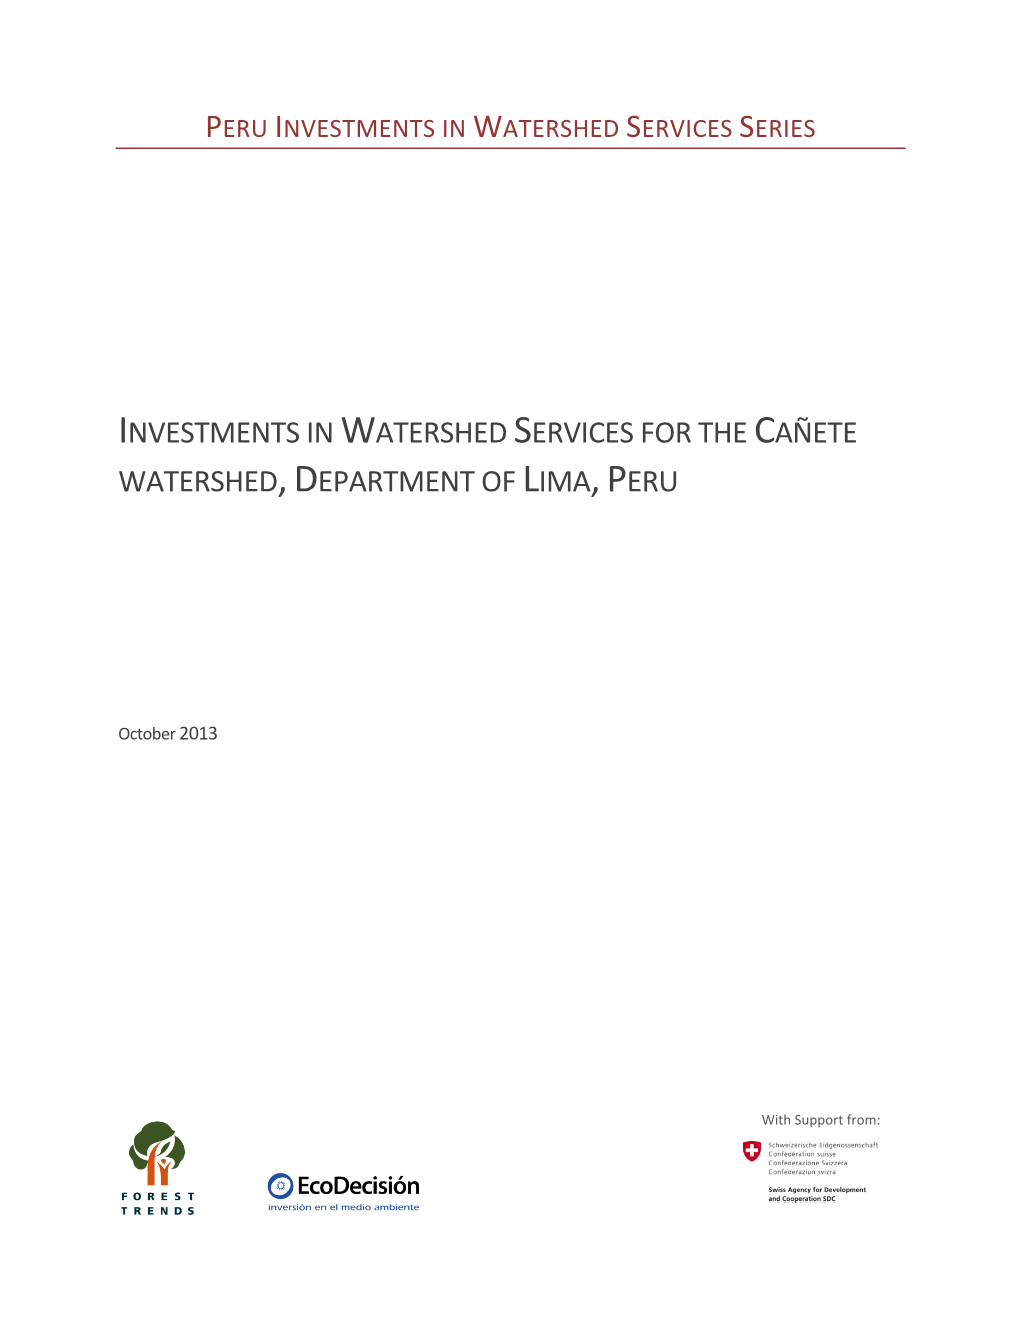 Investments in Watershed Services for the Cañete Watershed,Department of Lima,Peru